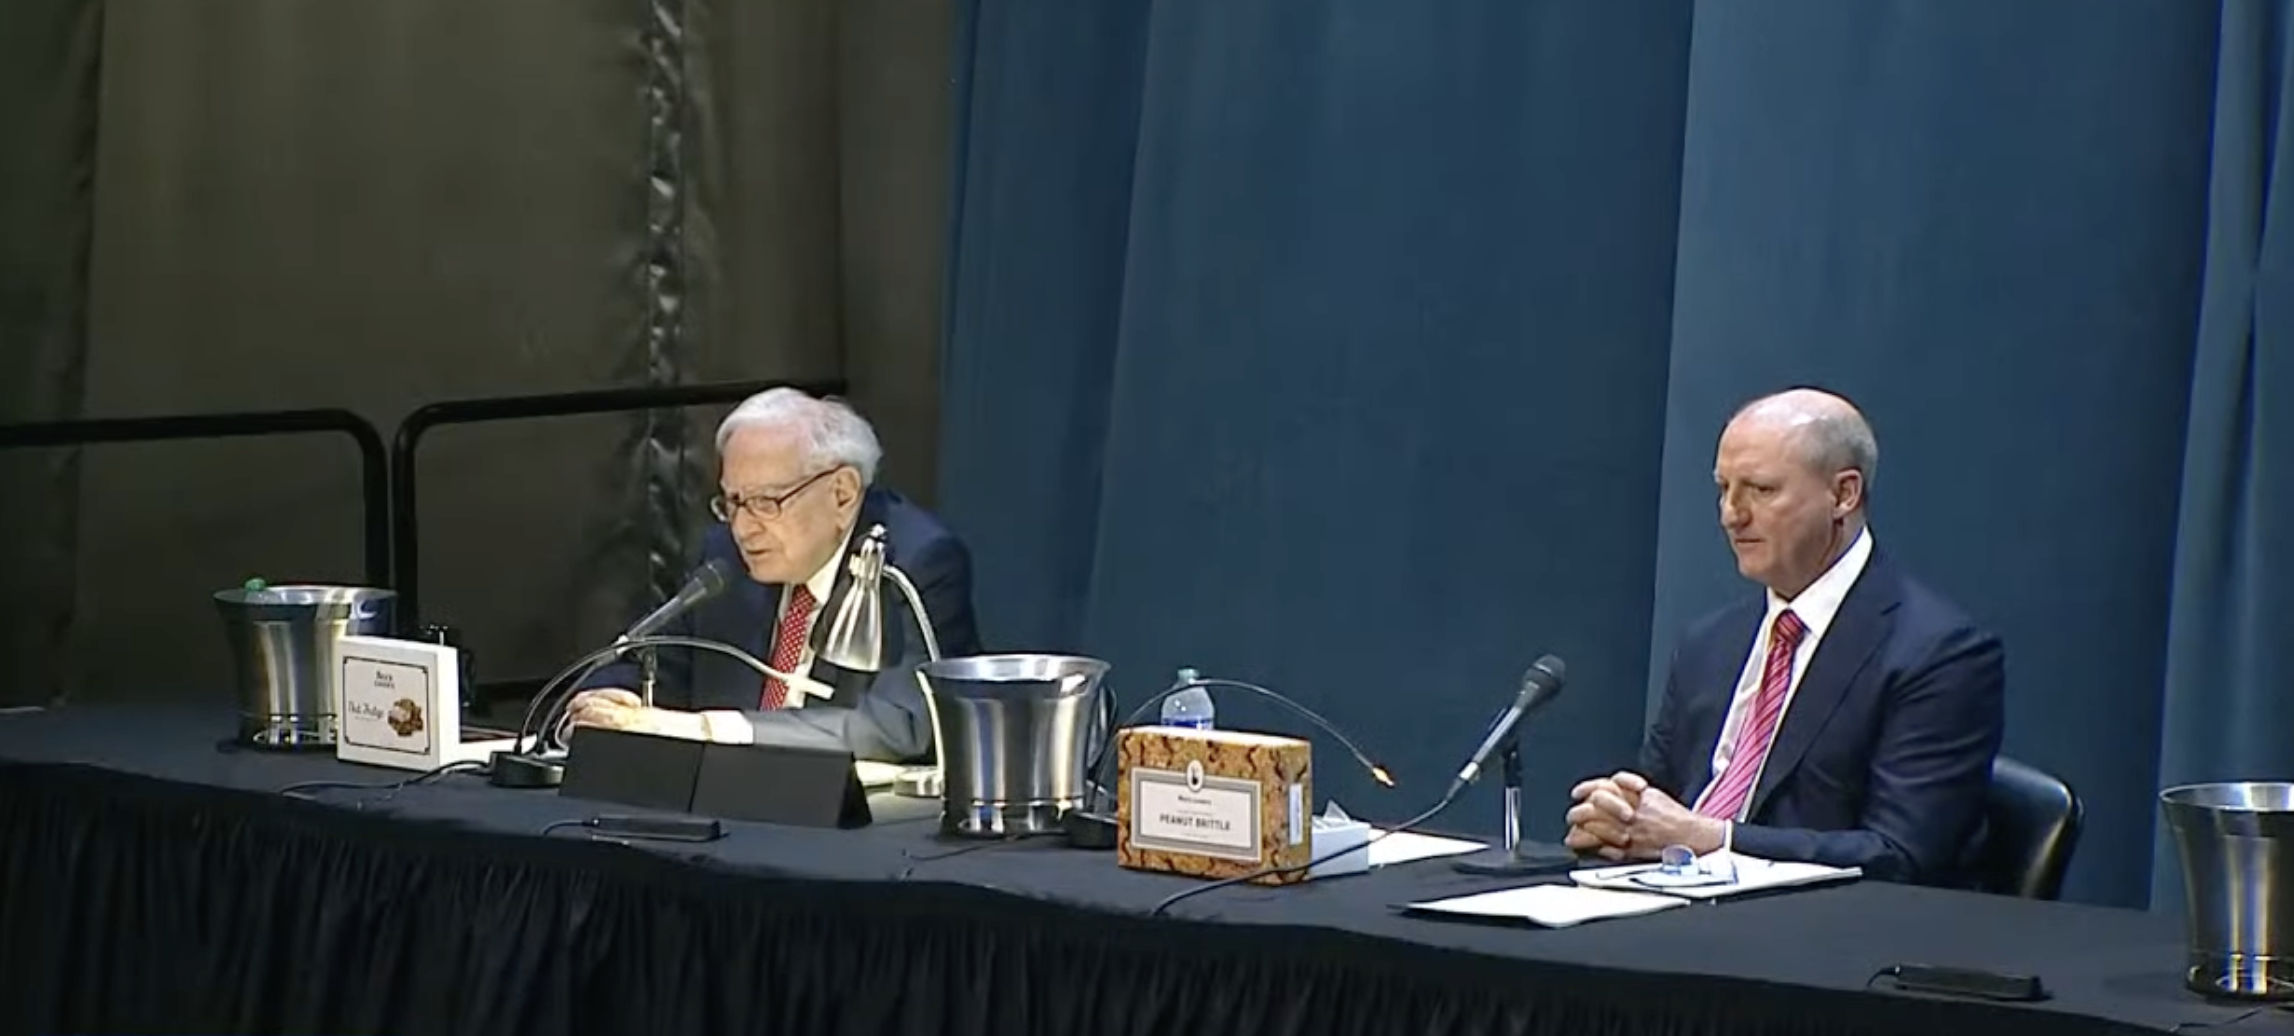 Berkshire Hathaway annual shareholders meeting: Warren Buffett takes stage without Charlie Munger for first time